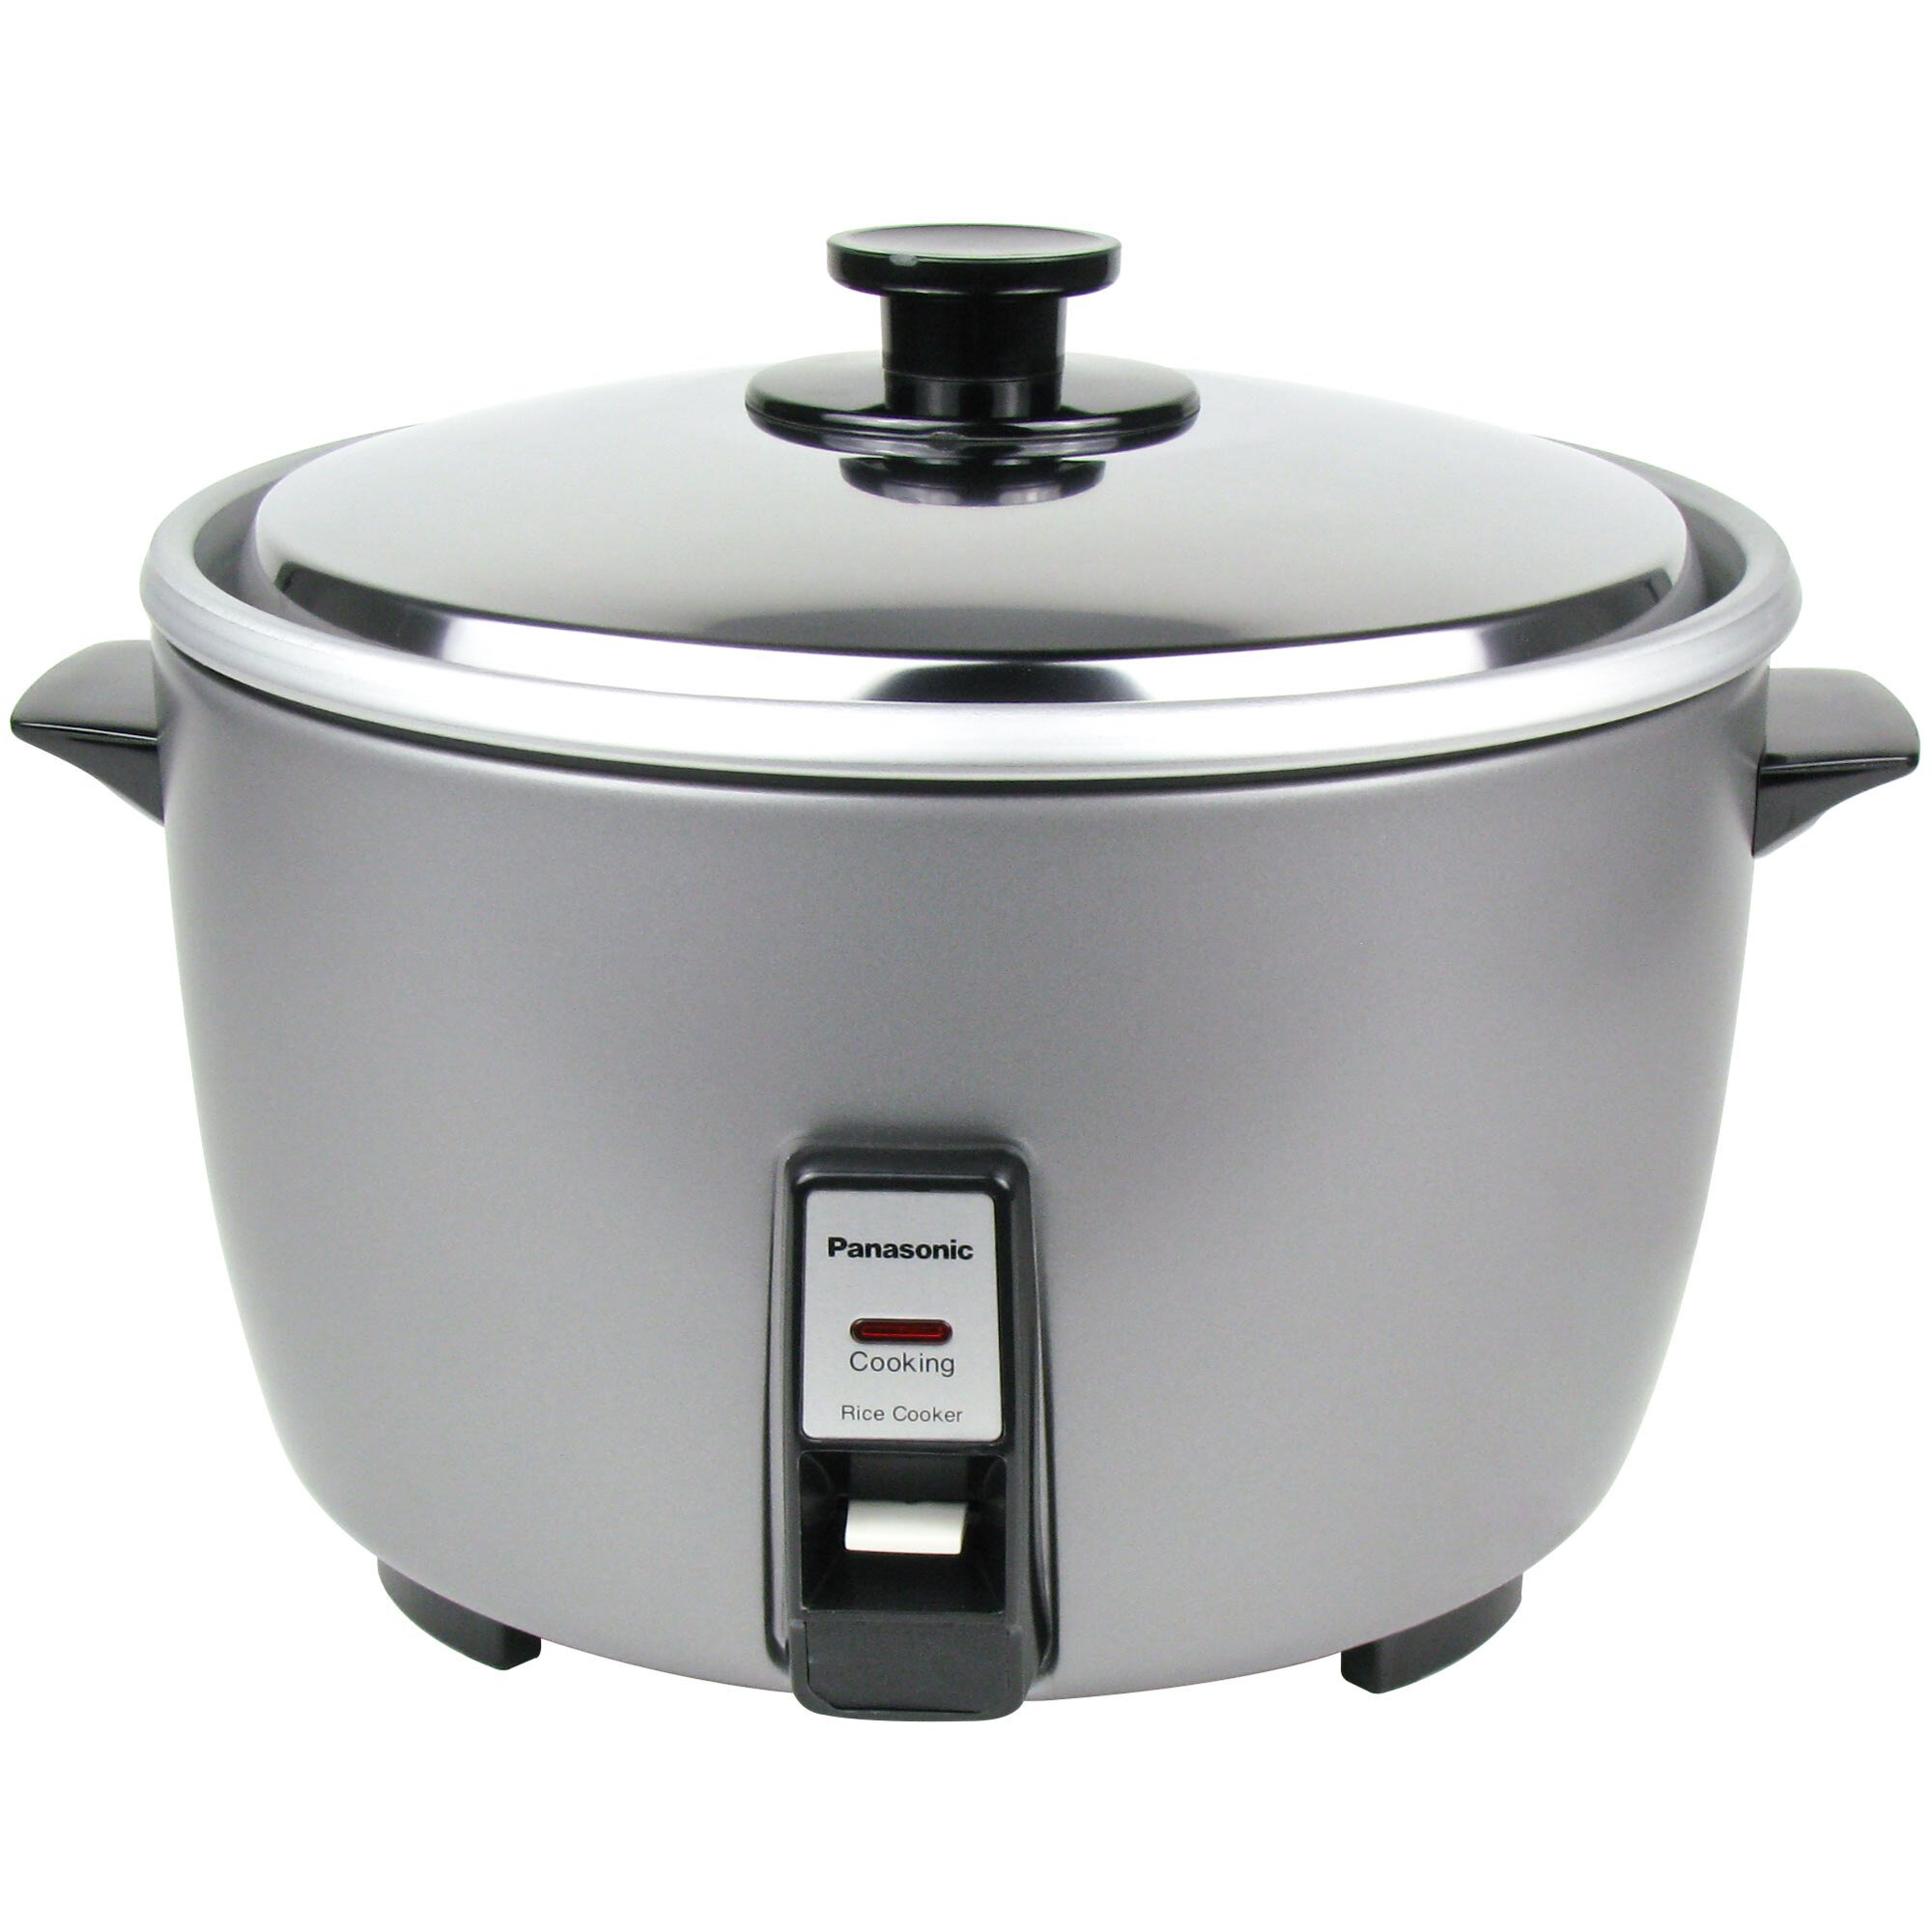 Panasonic Rice Cooker Review – Press To Cook